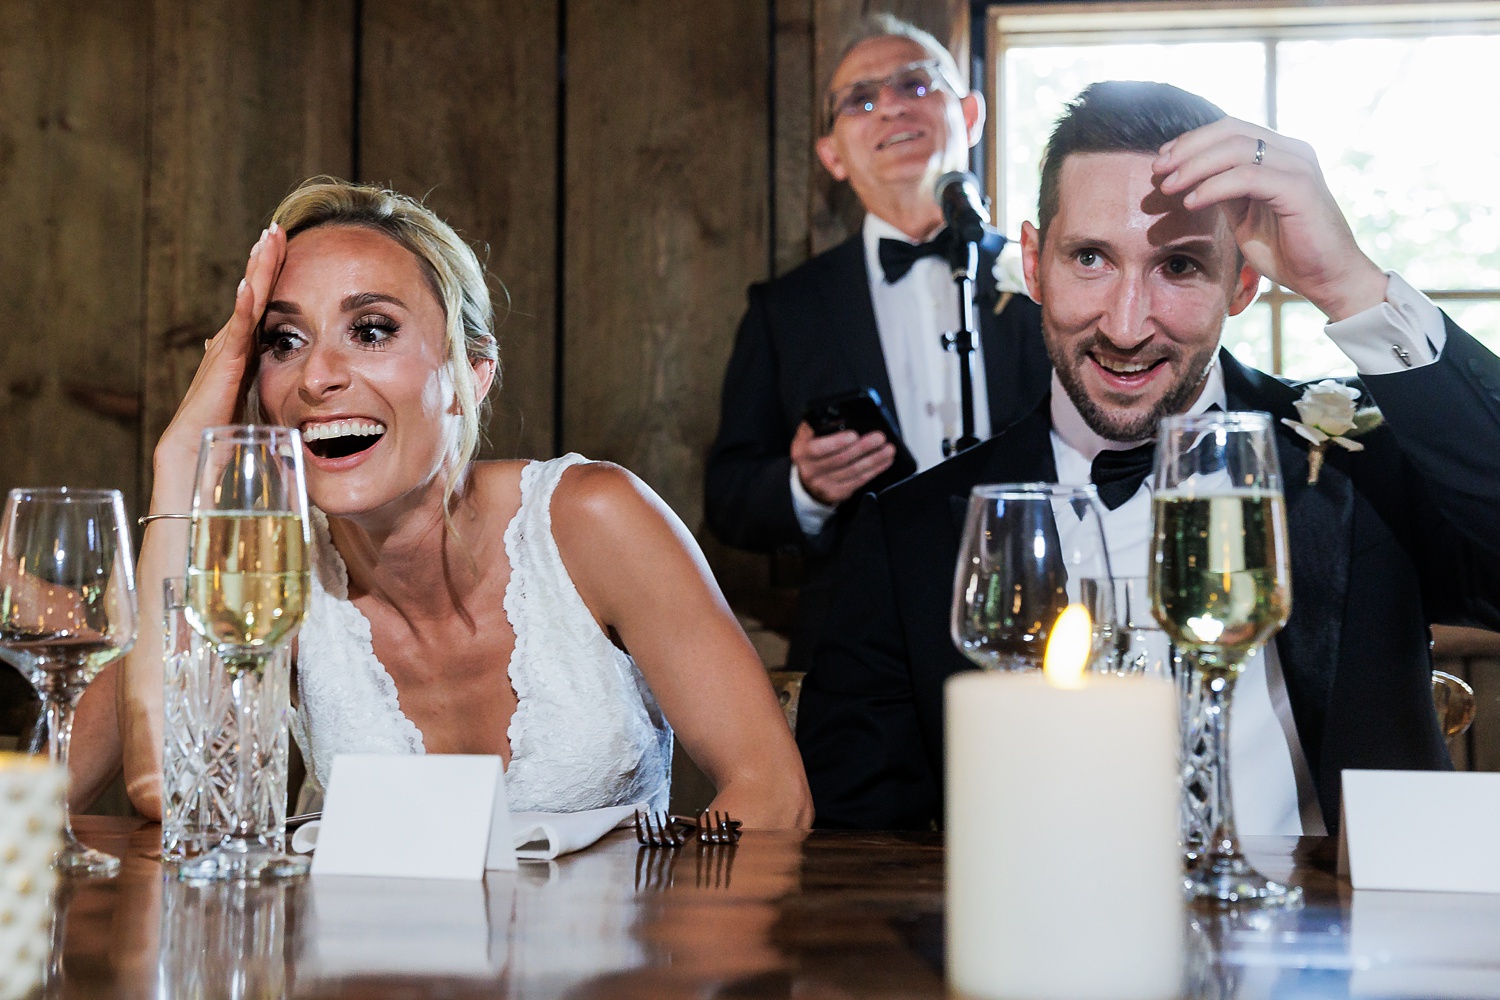 The father of the bride gives an incredibly shocking and funny toast on the wedding day in Maine